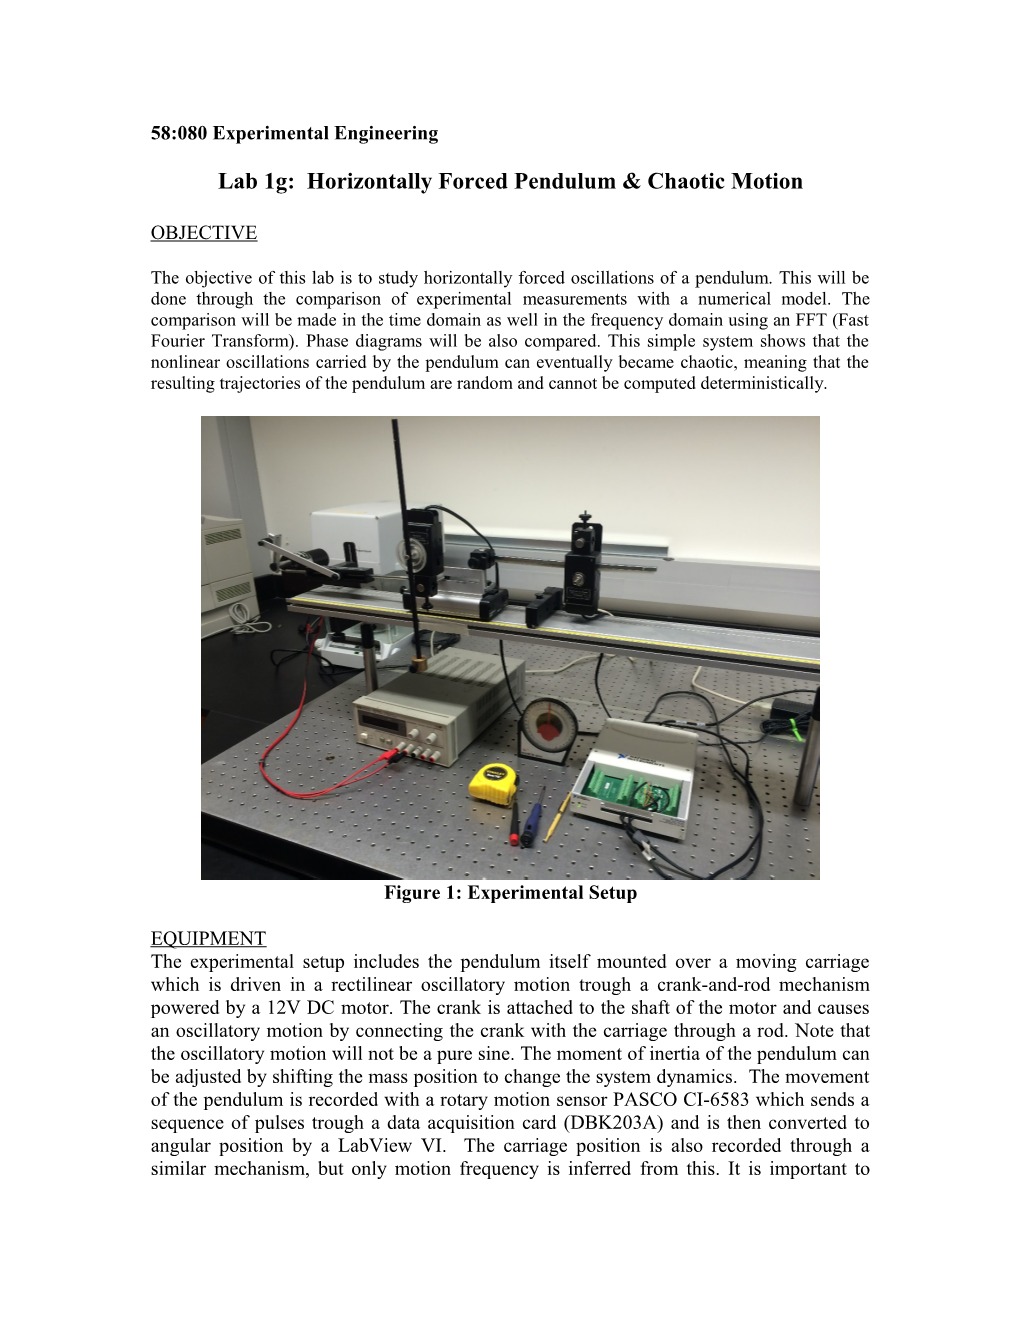 Lab1g: Horizontally Forced Pendulum & Chaotic Motion